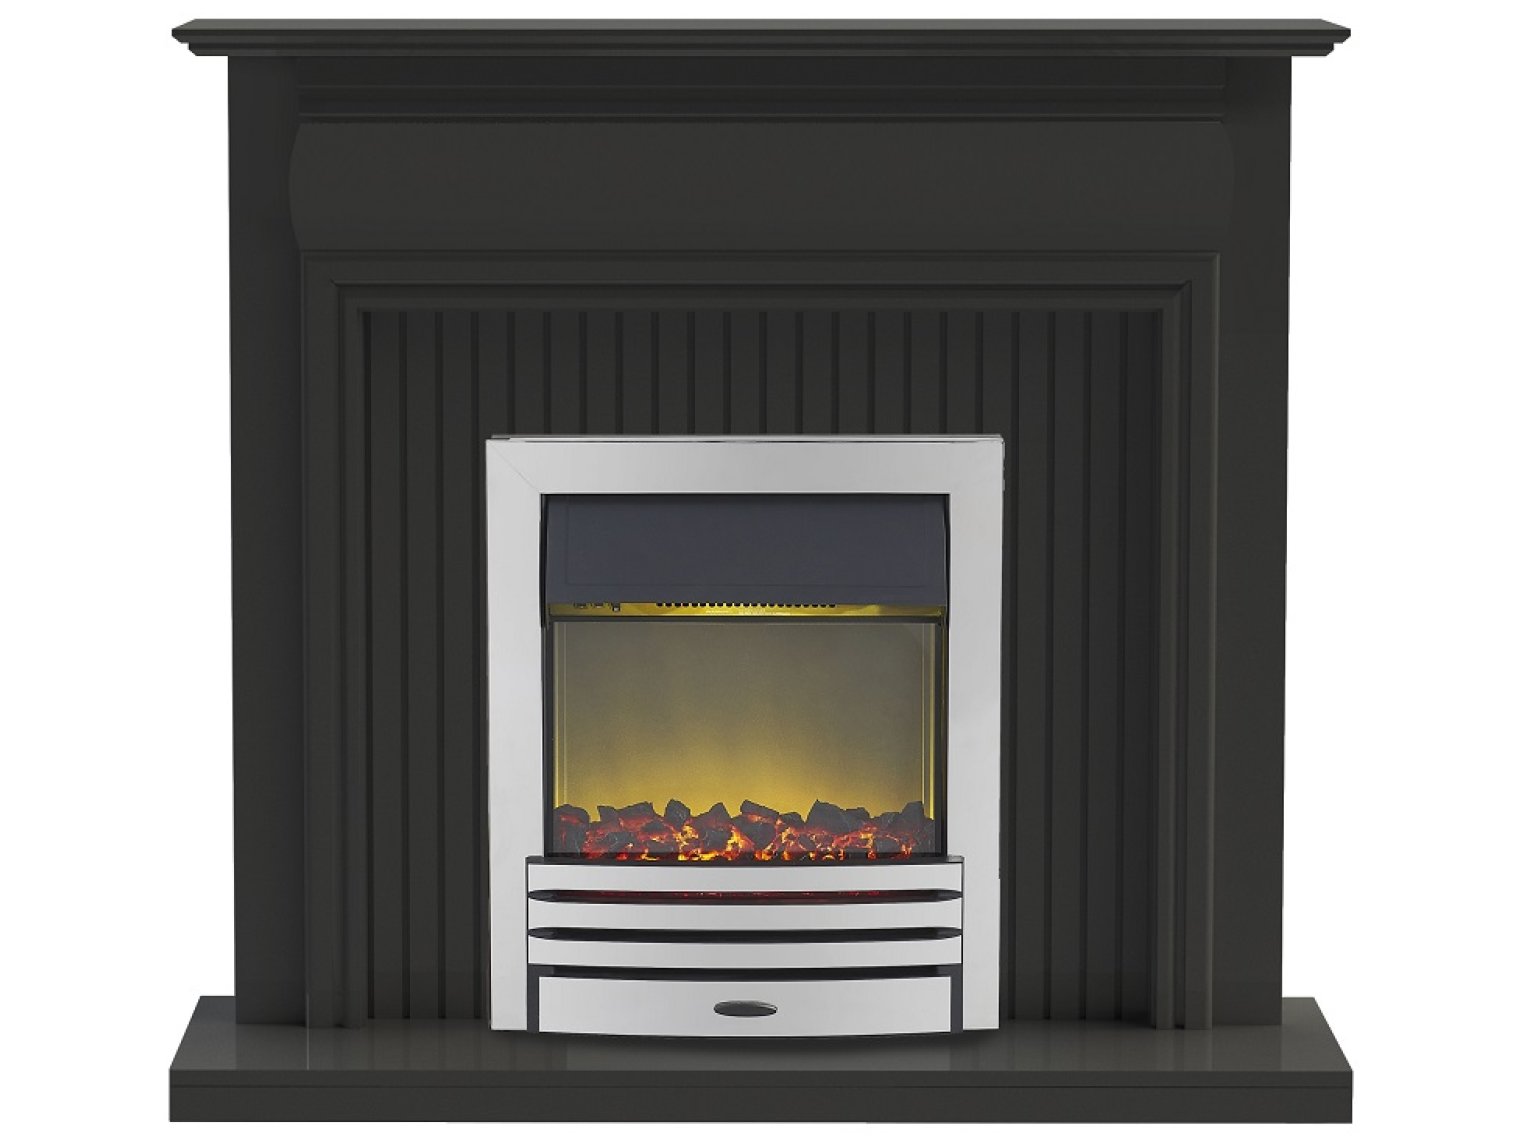 Adam Westminster Fireplace in Black with Eclipse Electric Fire in Chrome, 48 Inch